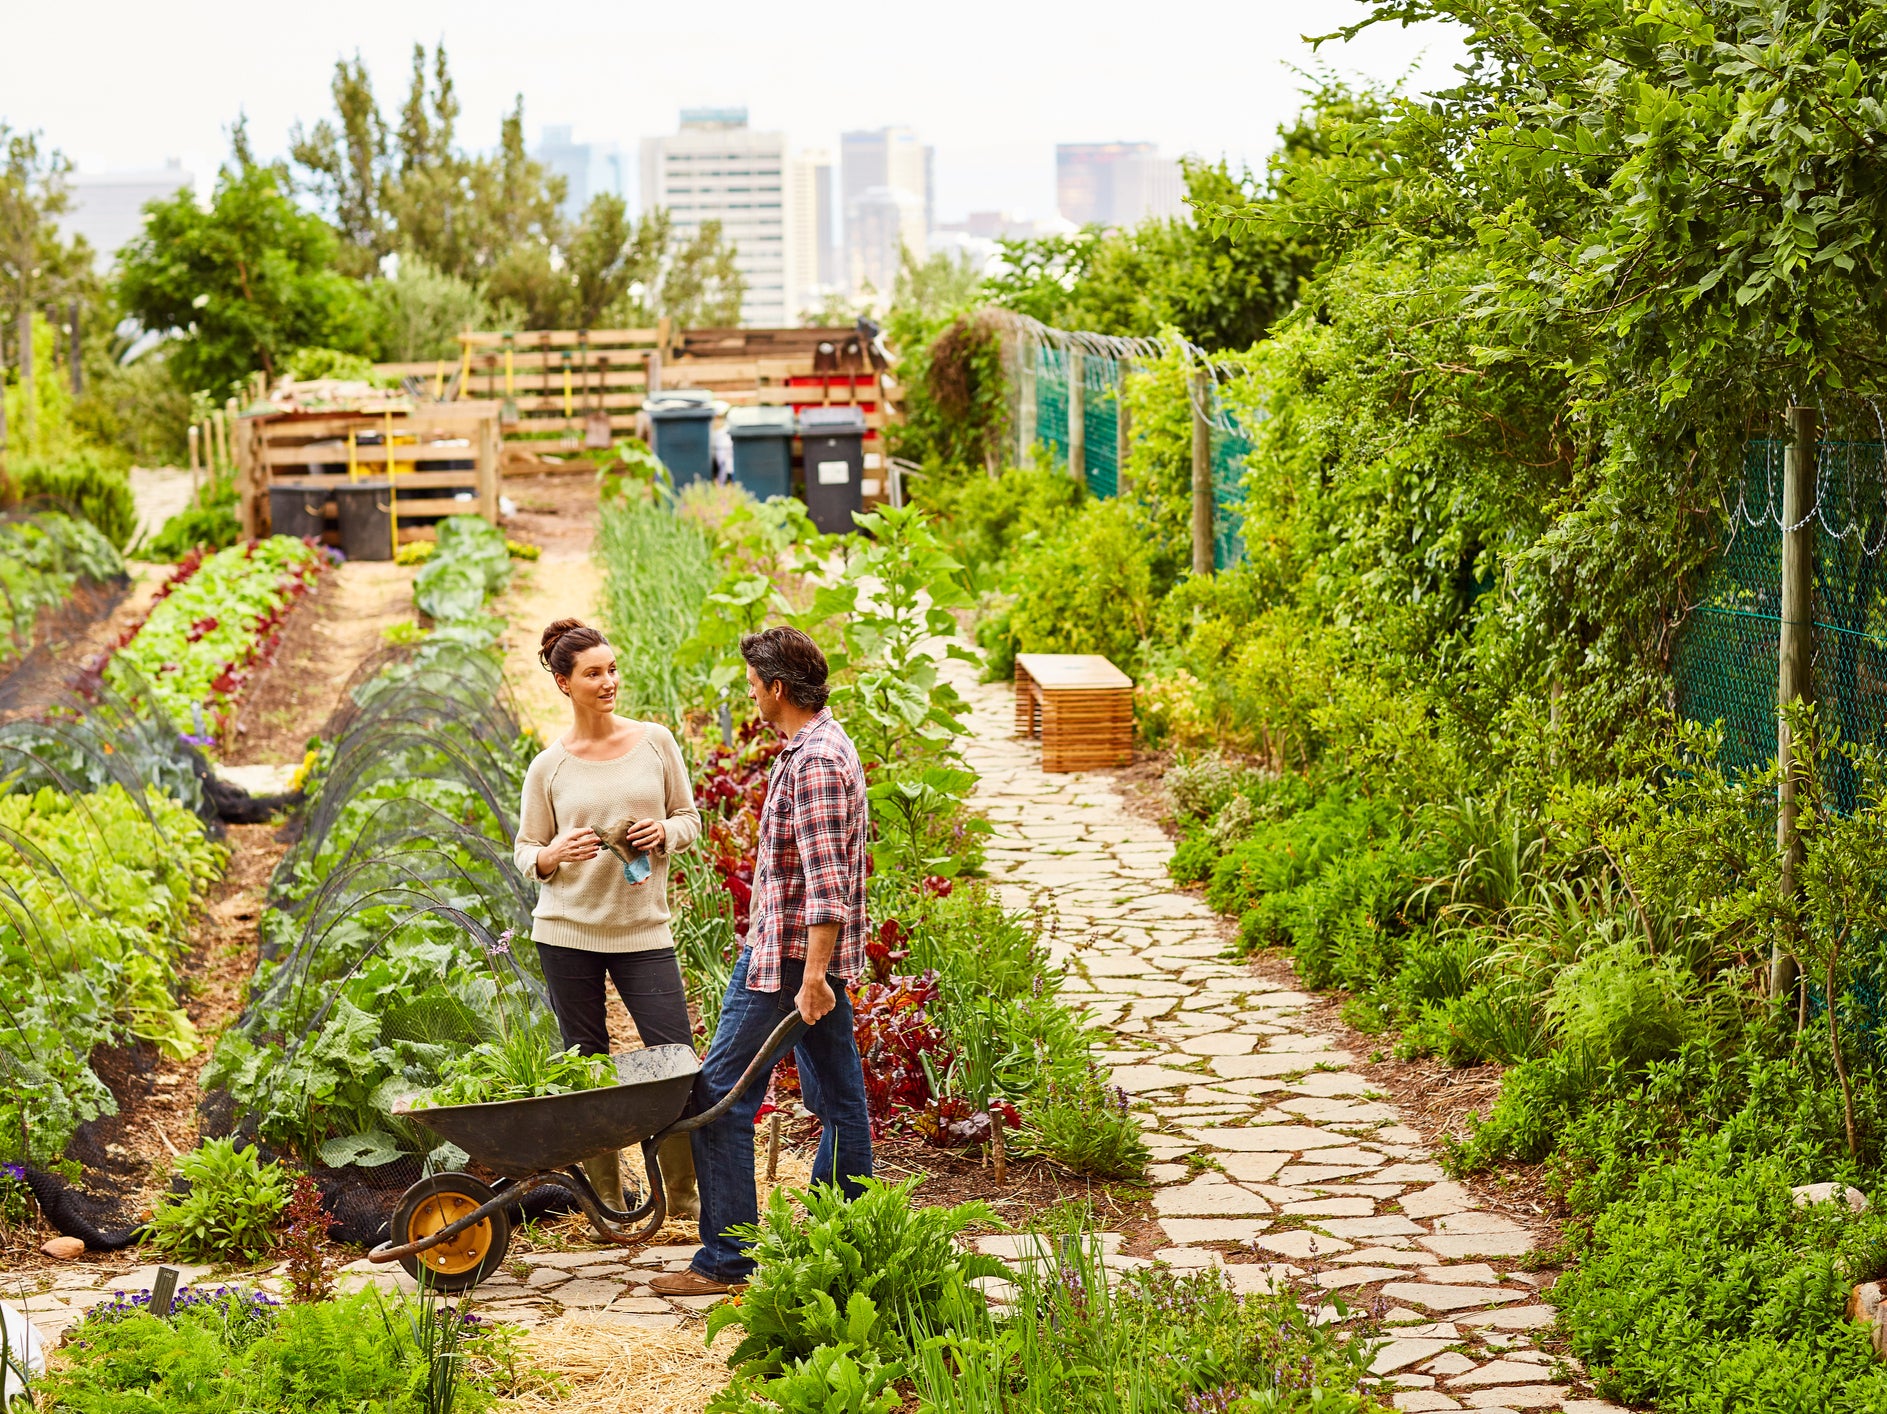 In the UK only around 1 per cent of urban green space is taken up by allotments dedicated for food production